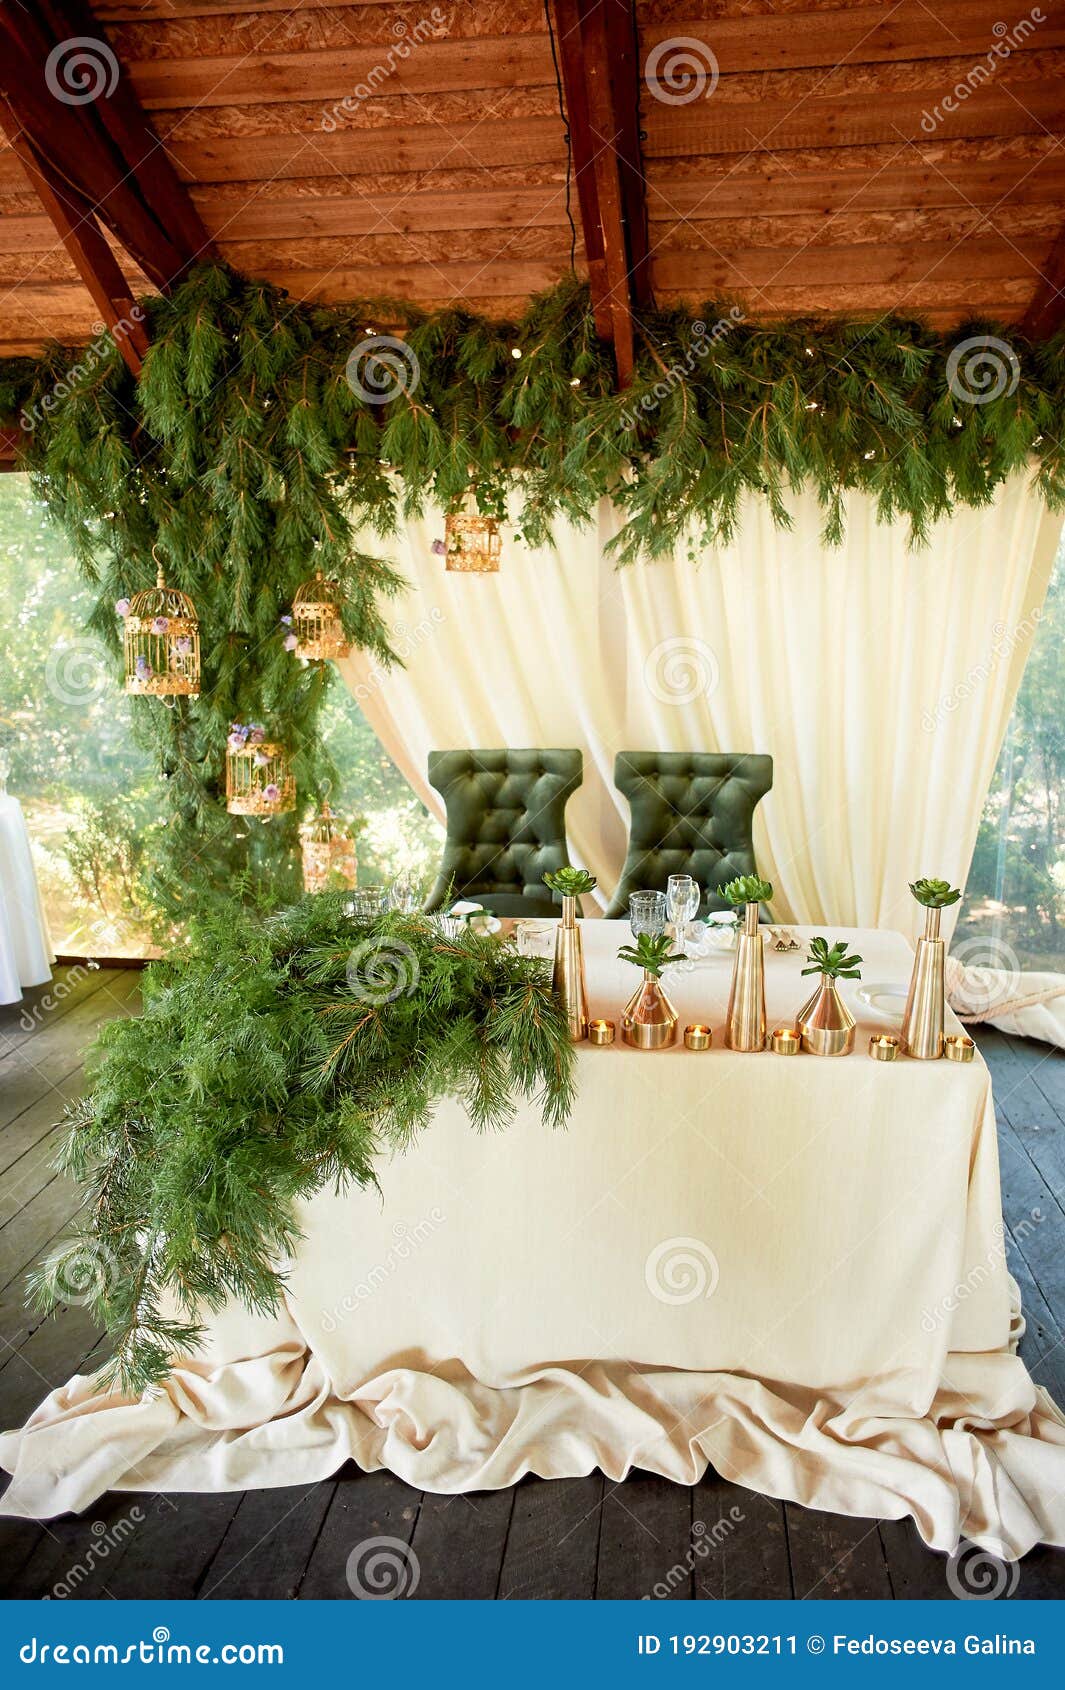 3 906 Terrace Wedding Photos Free Royalty Free Stock Photos From Dreamstime